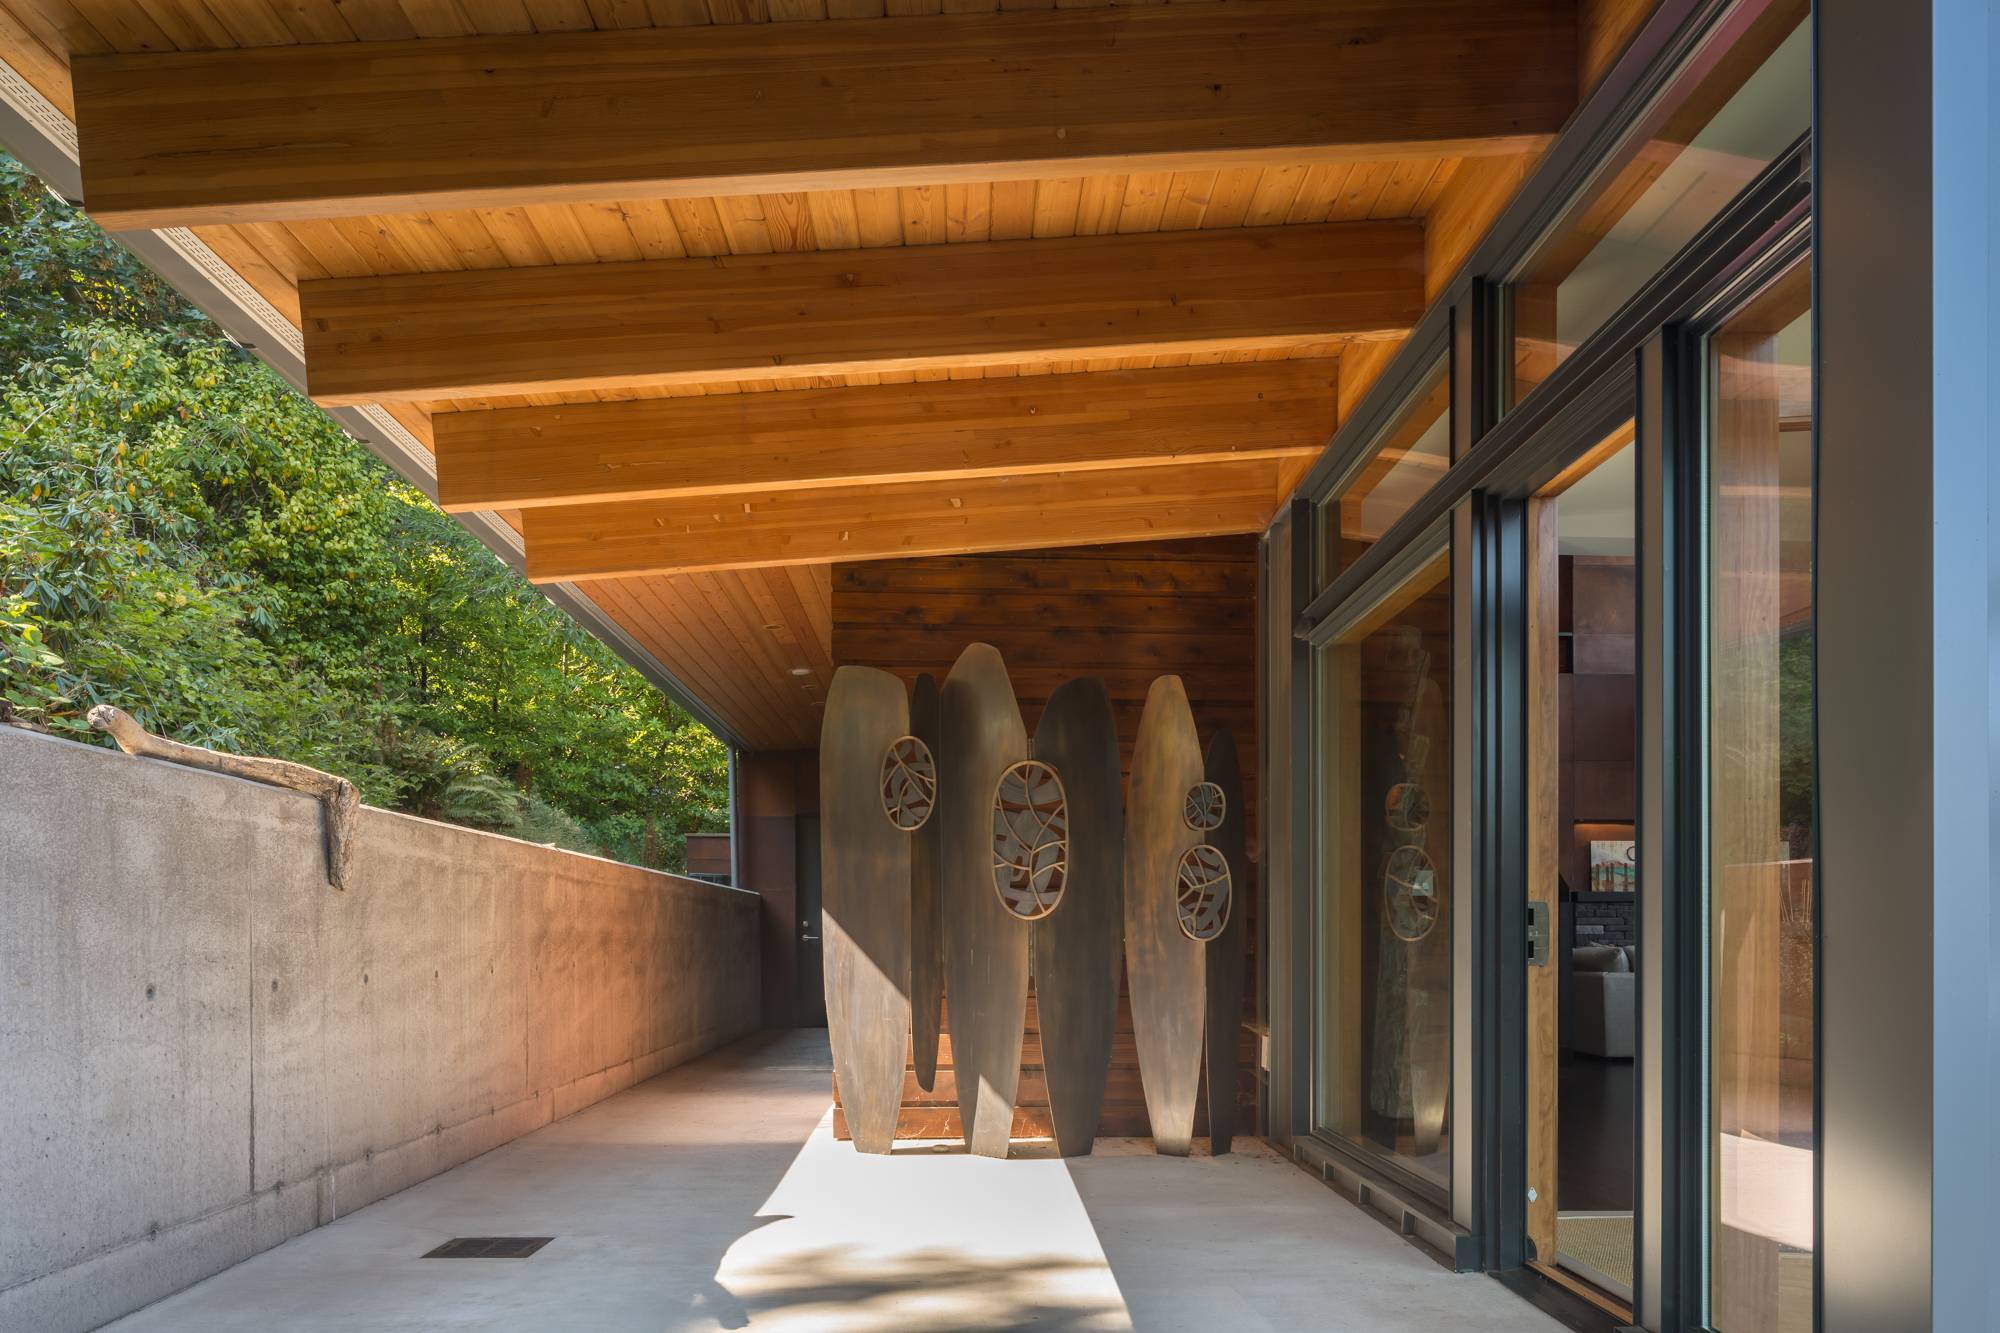 tall wooden sculptures leaning on wall of concrete entranceway